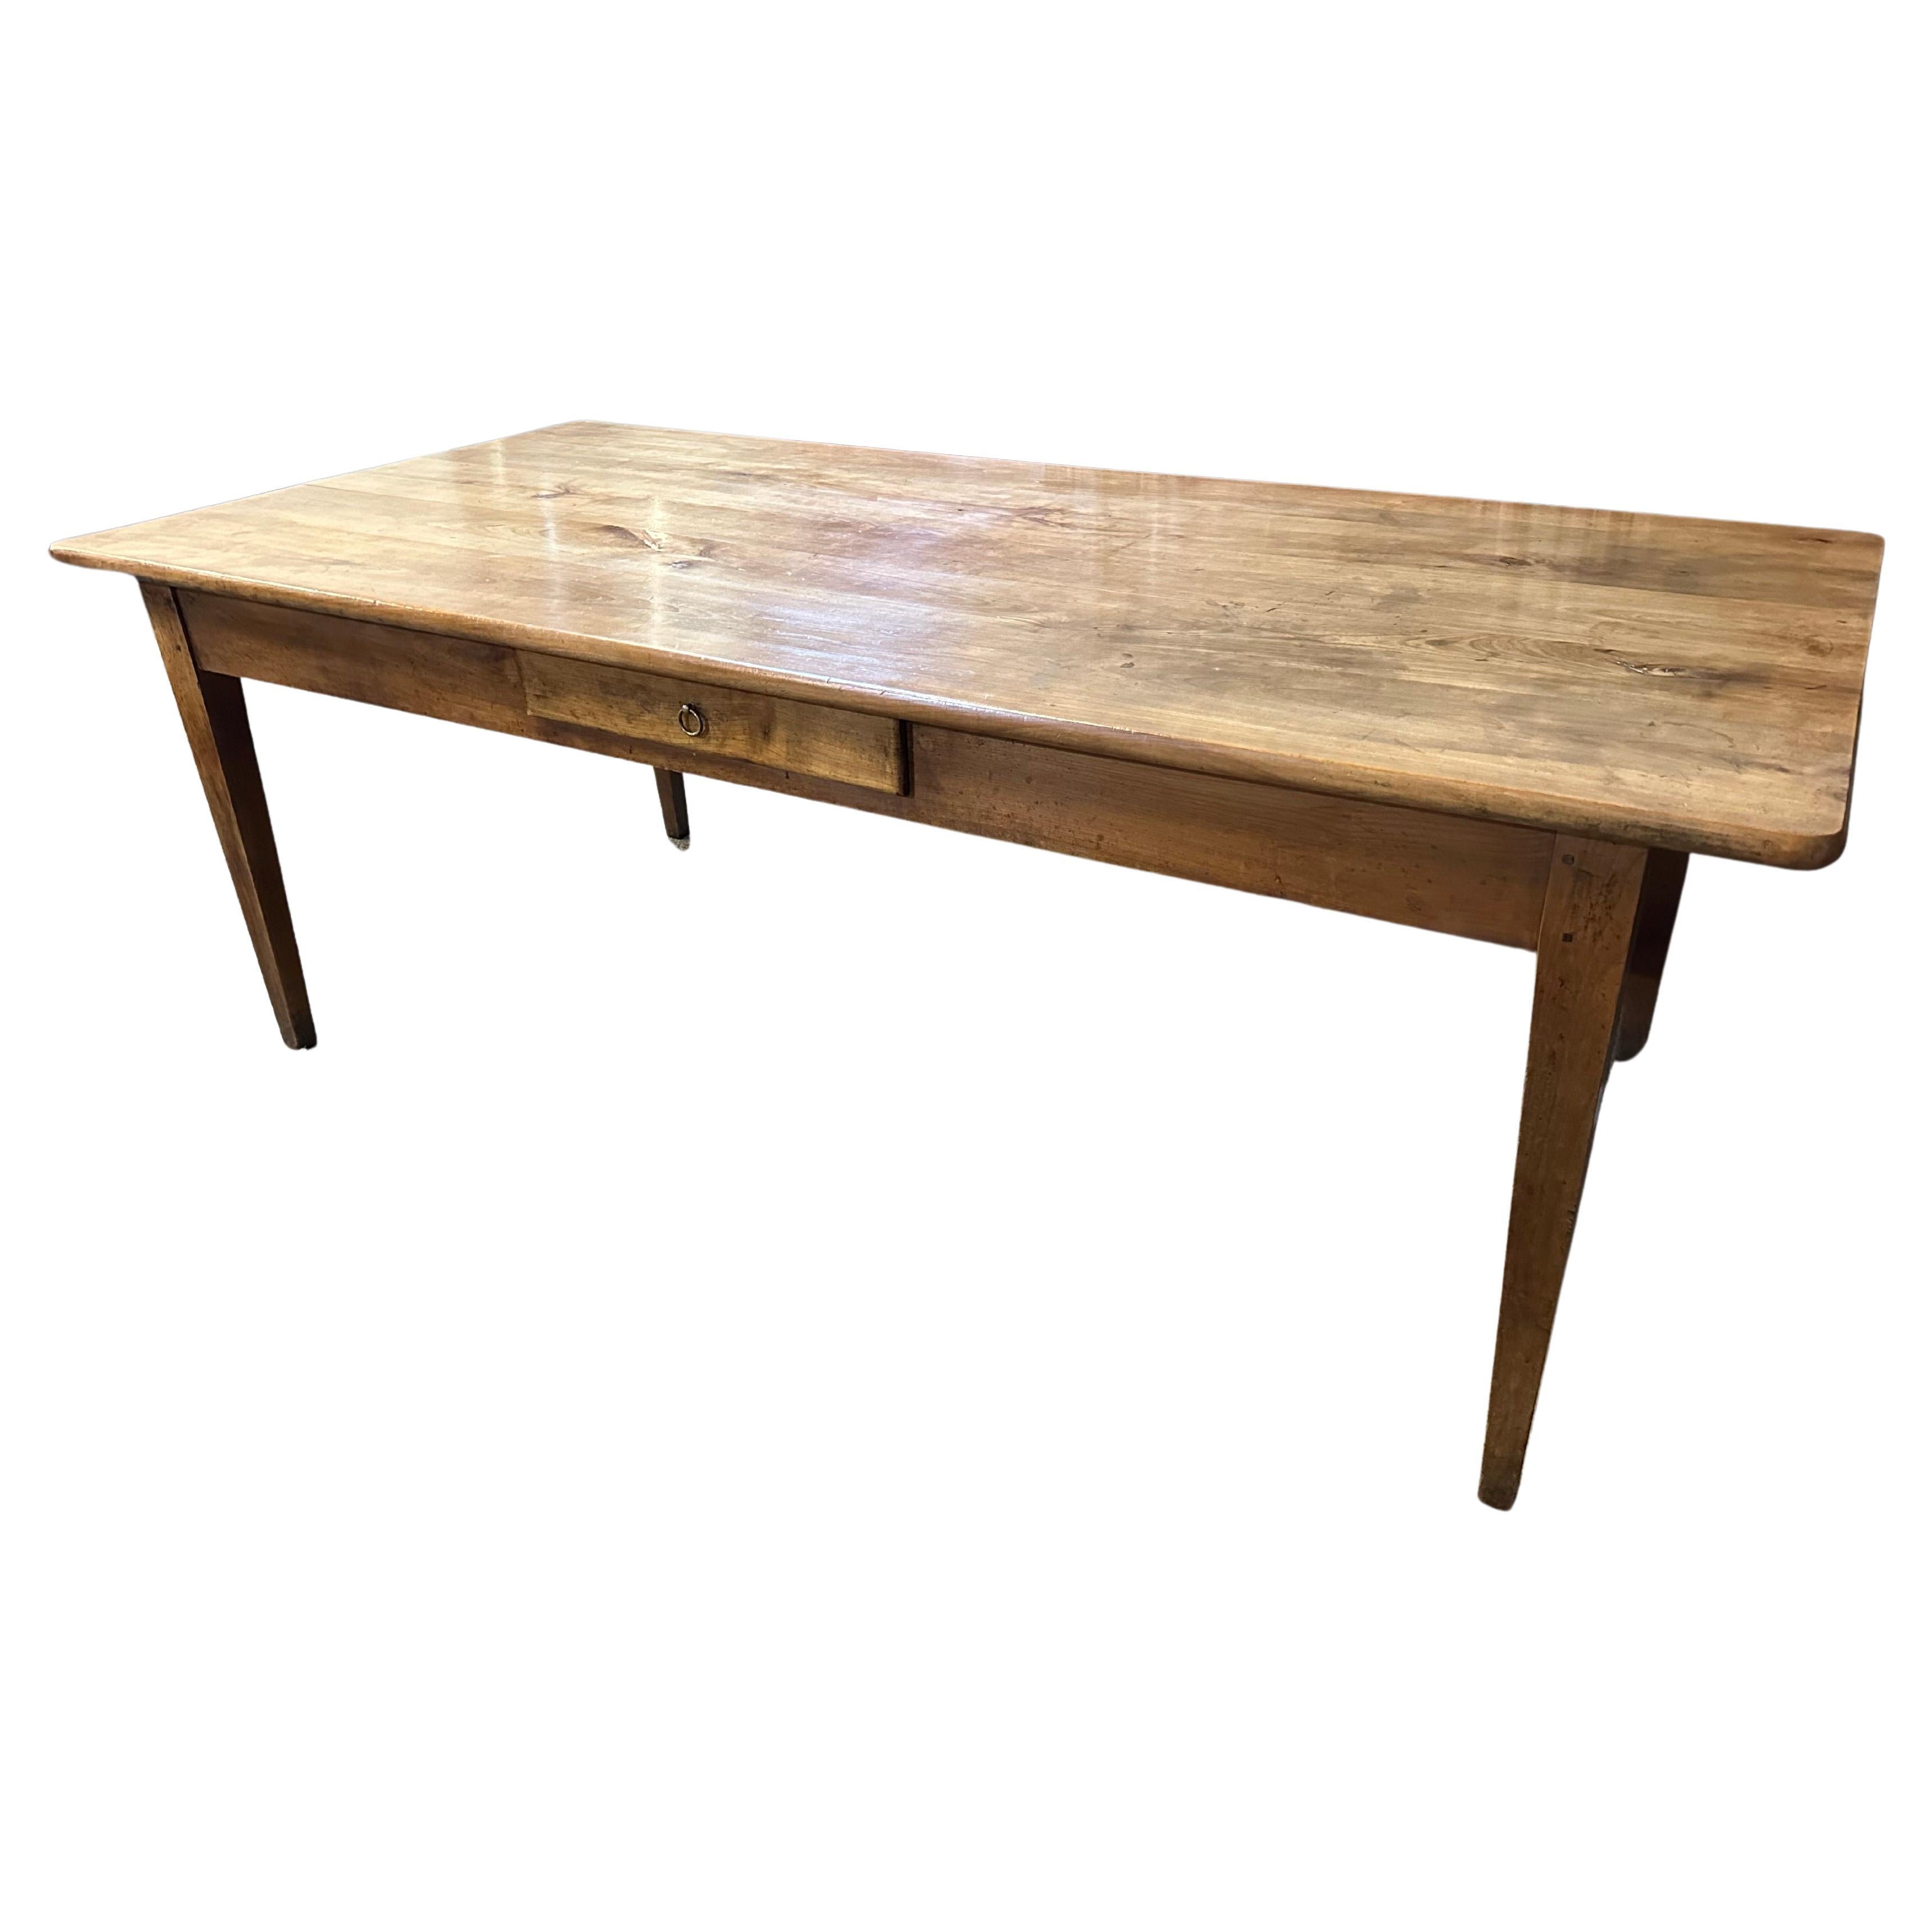 19th Century Wide Cherry Dining Table with One Drawer